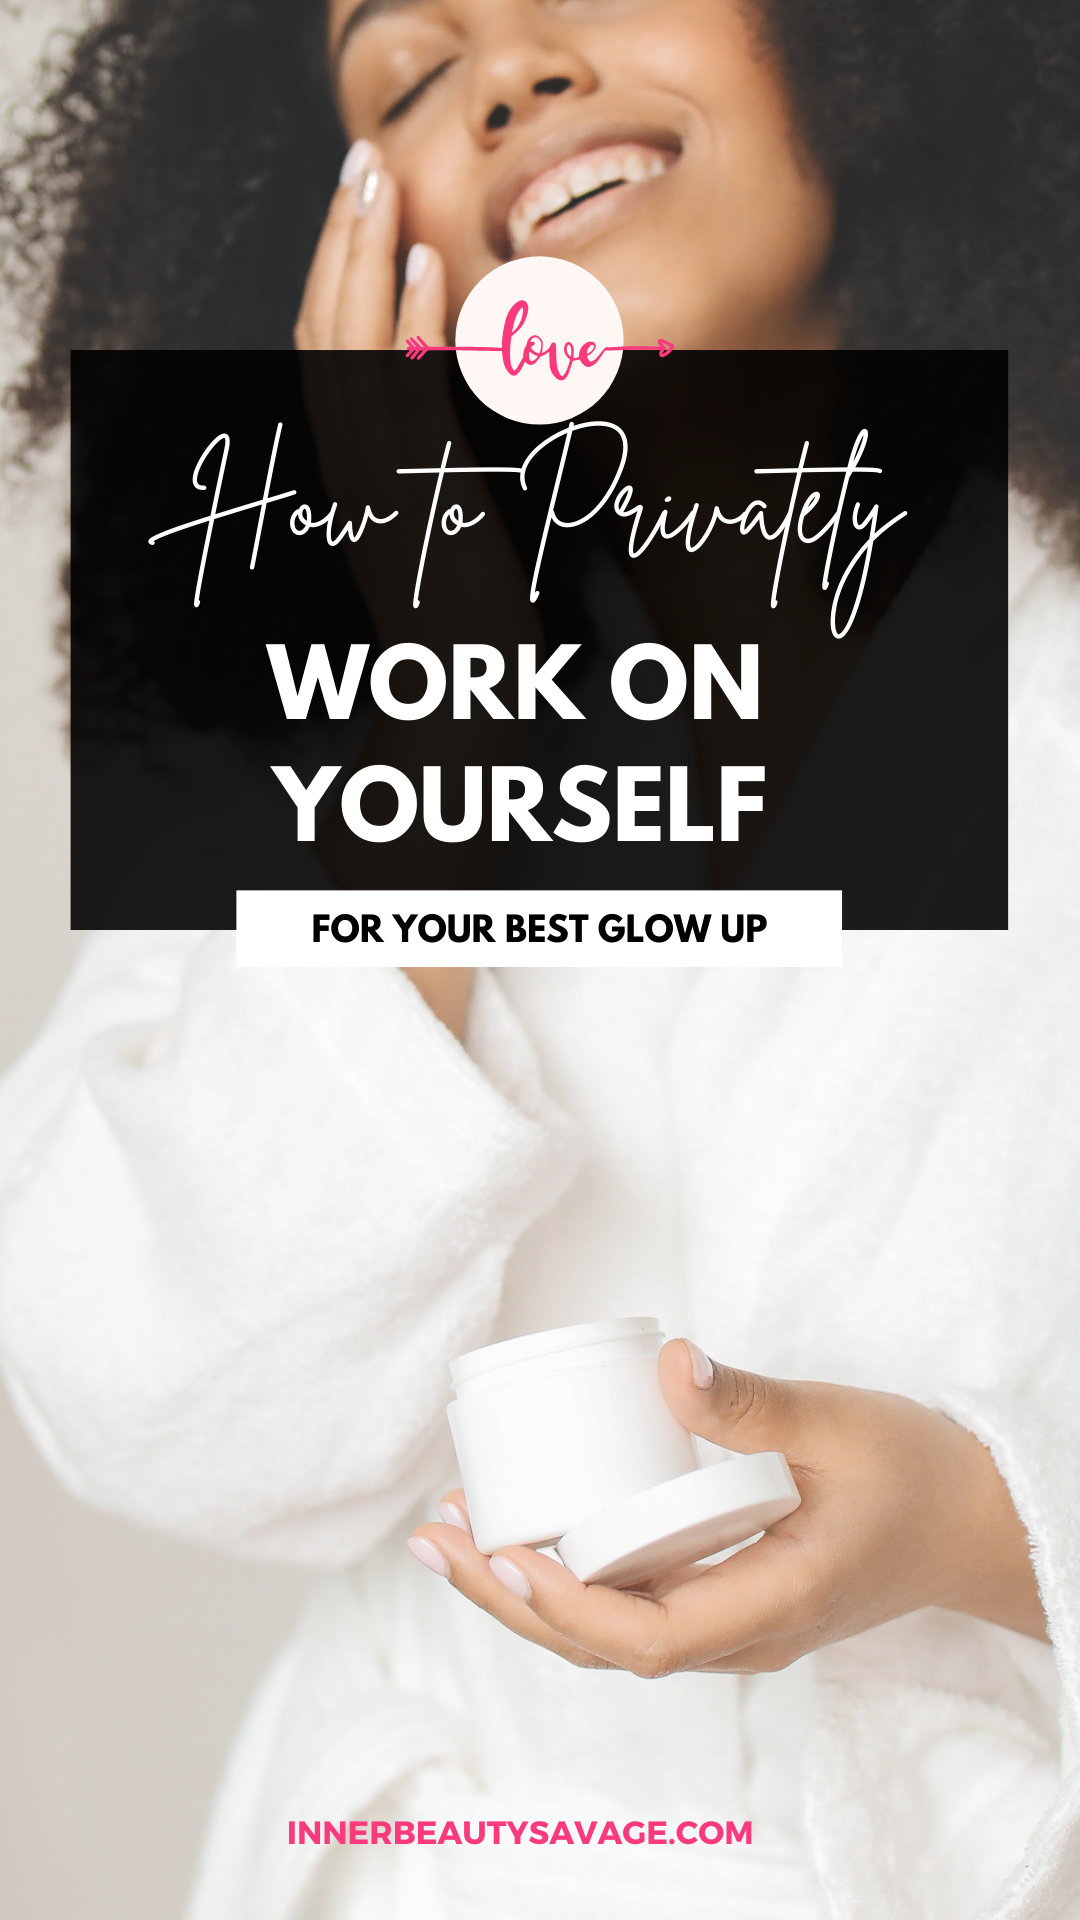 working on yourself for your best glow-up